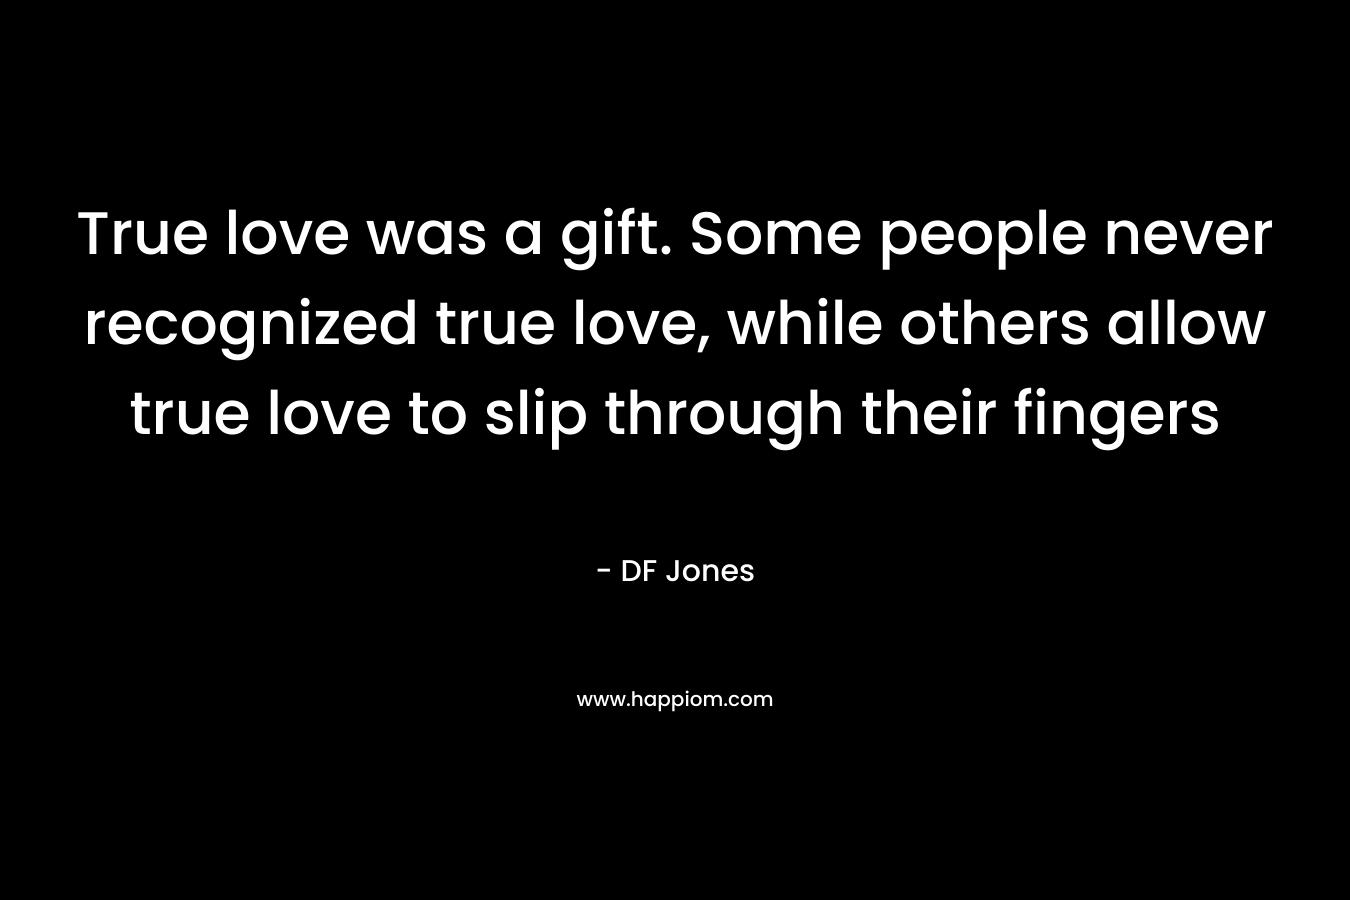 True love was a gift. Some people never recognized true love, while others allow true love to slip through their fingers